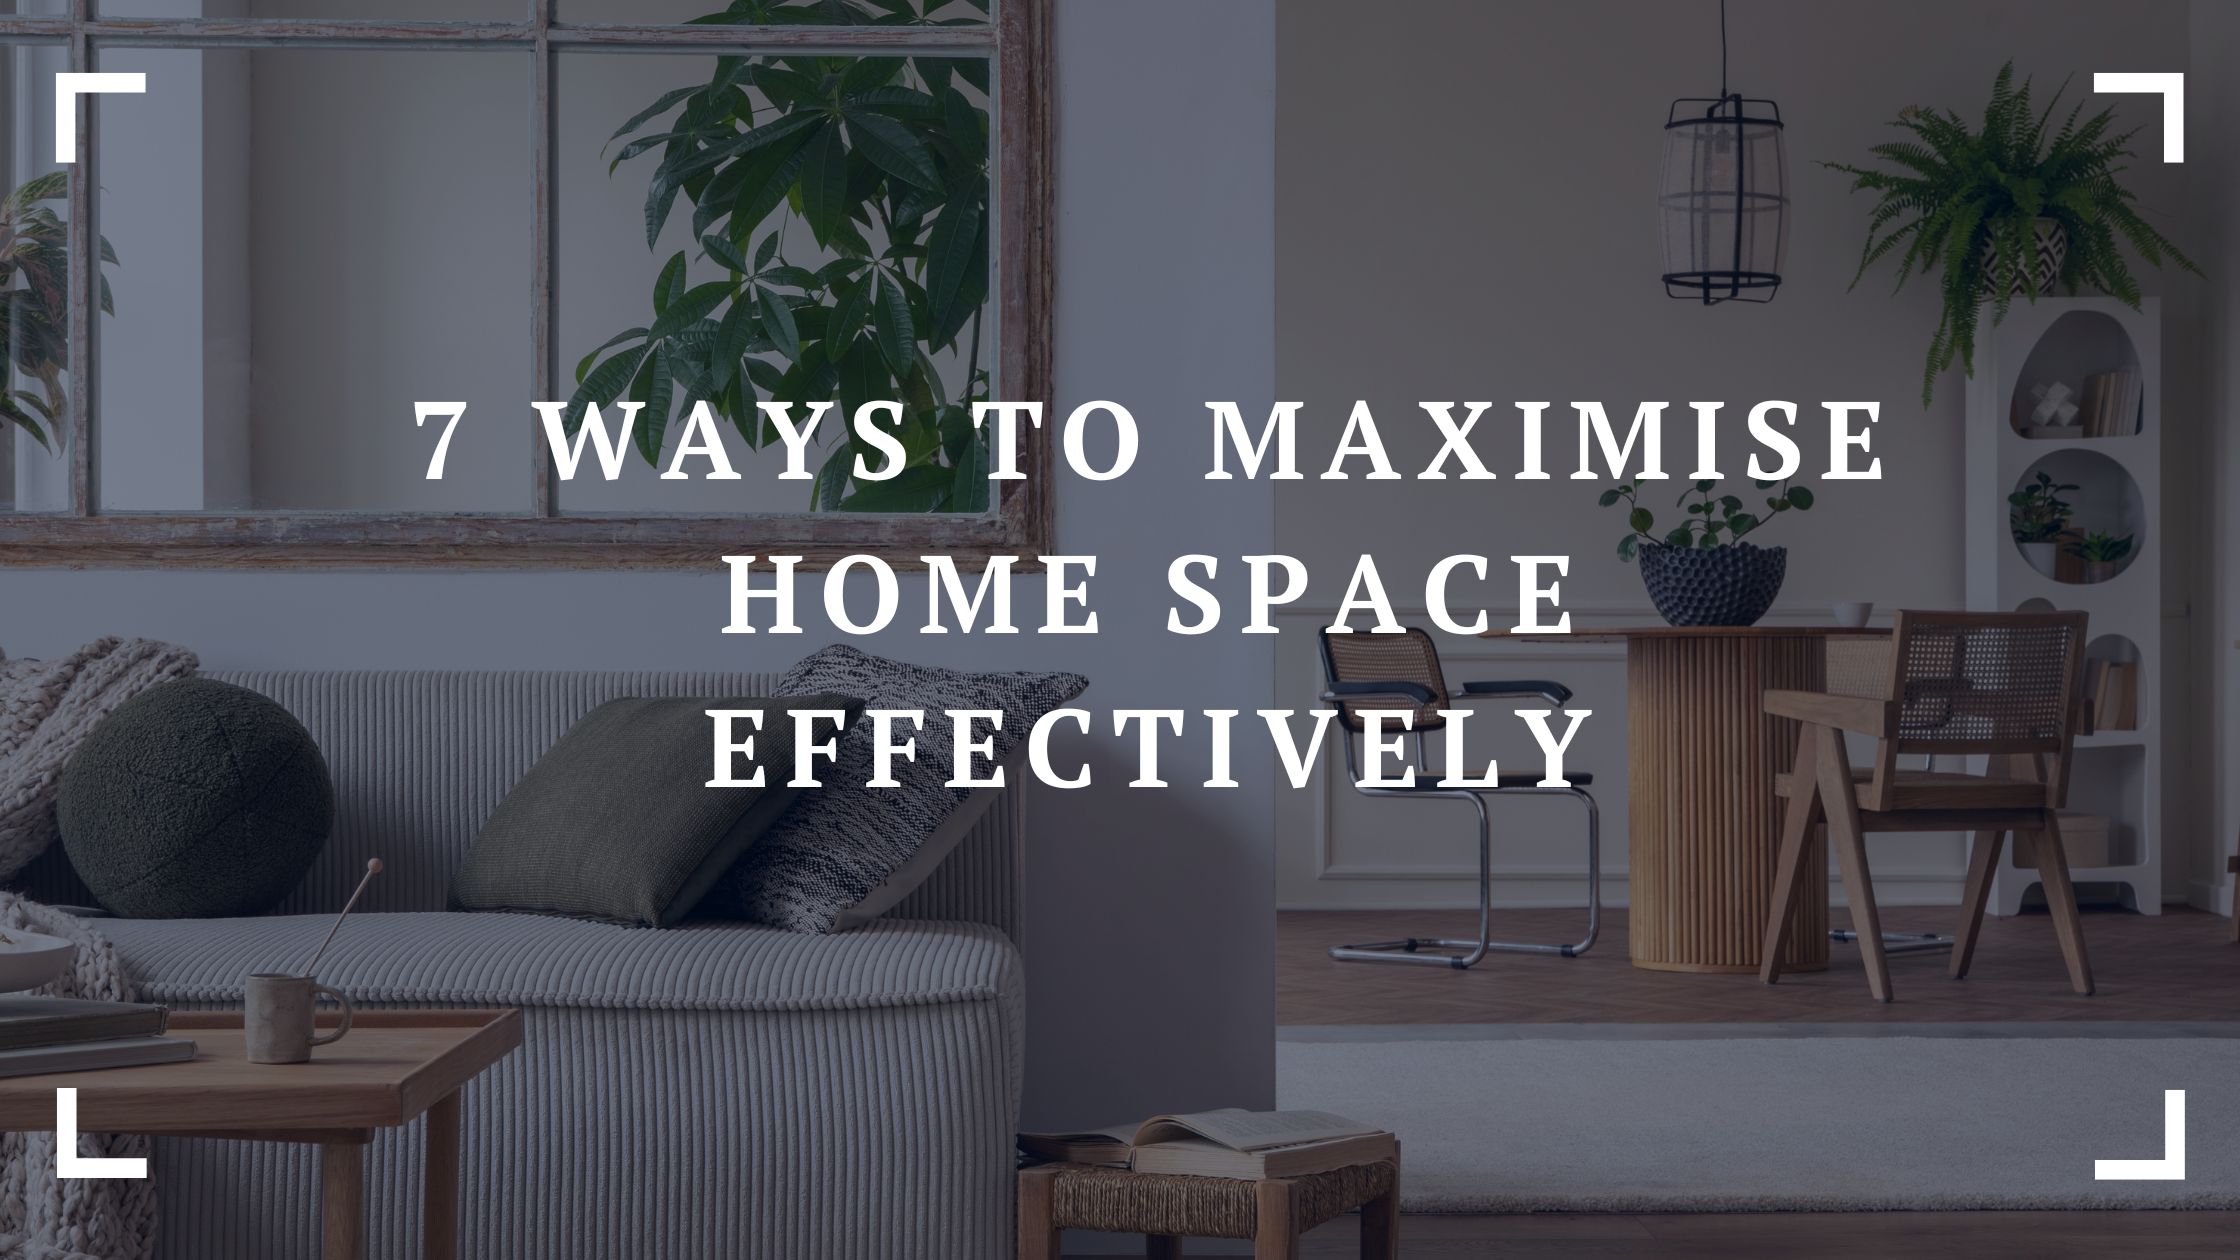 7 ways to maximise home space effectively